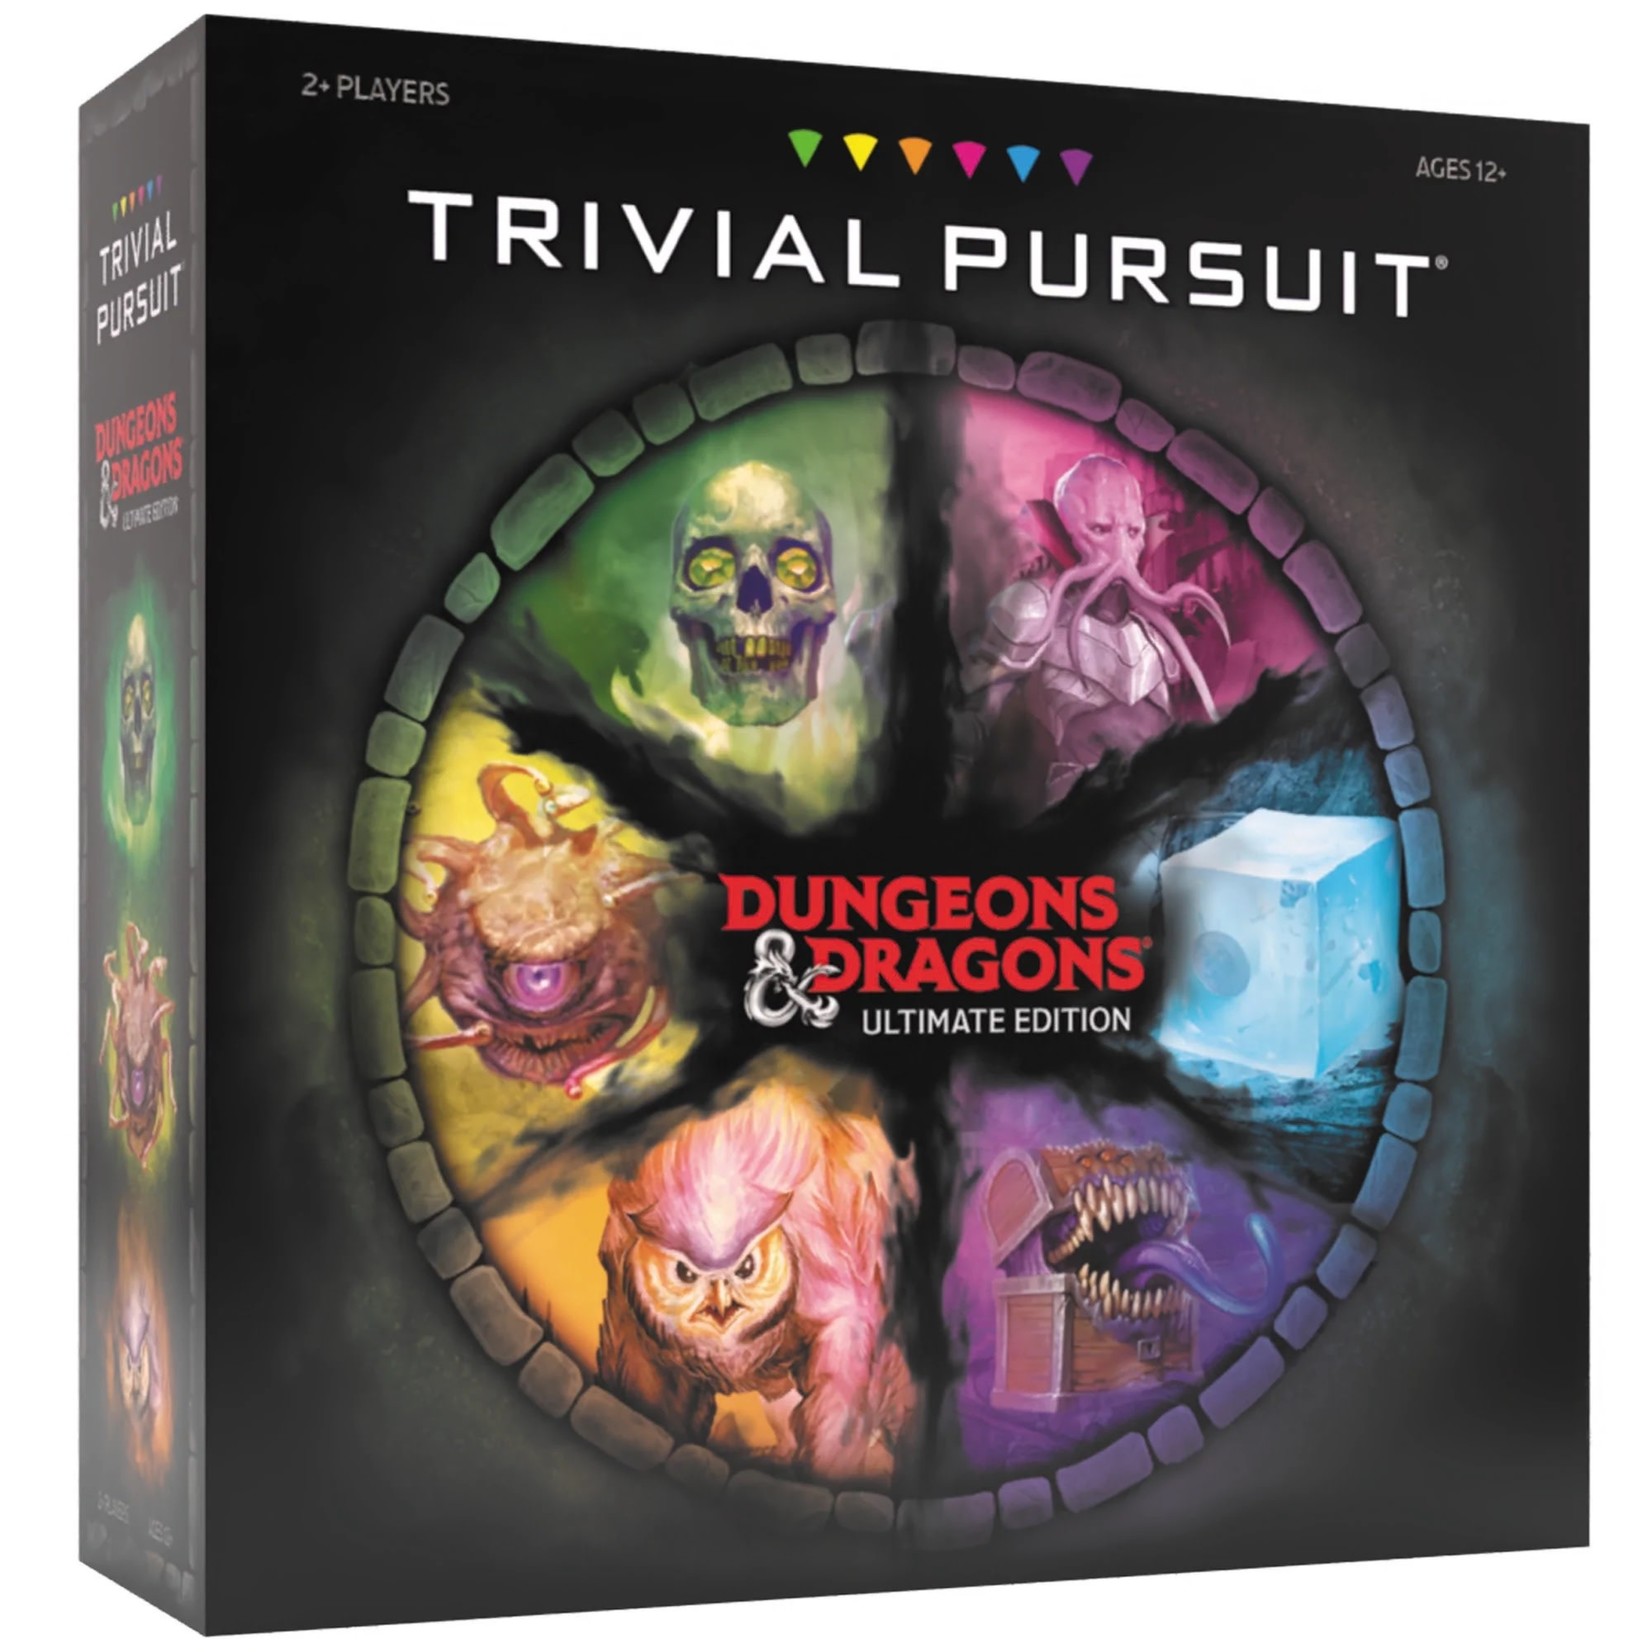 USAopoly TRIVIAL PURSUIT®: Dungeons & Dragons Ultimate Edition